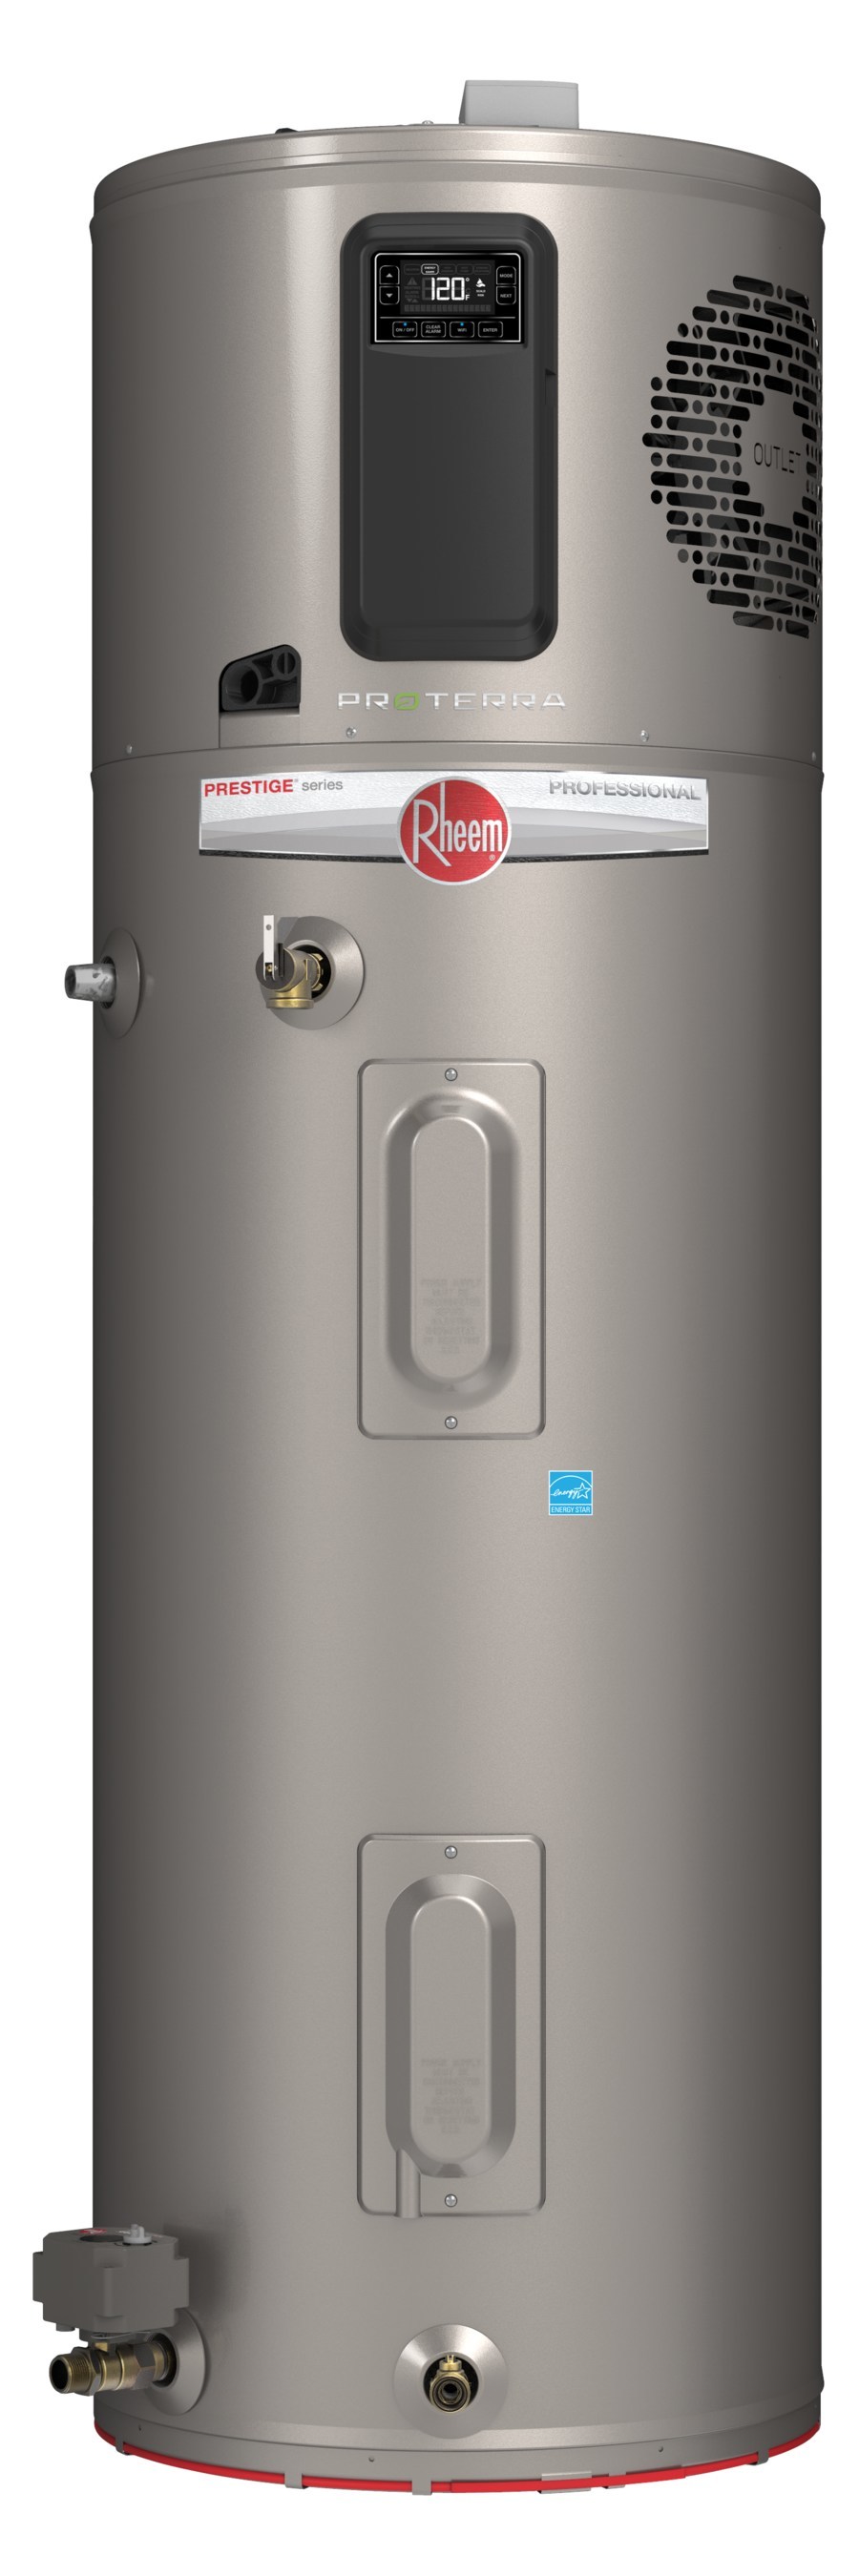 new-rheem-hybrid-water-heater-installation-in-tampa-fl-the-ducting-is